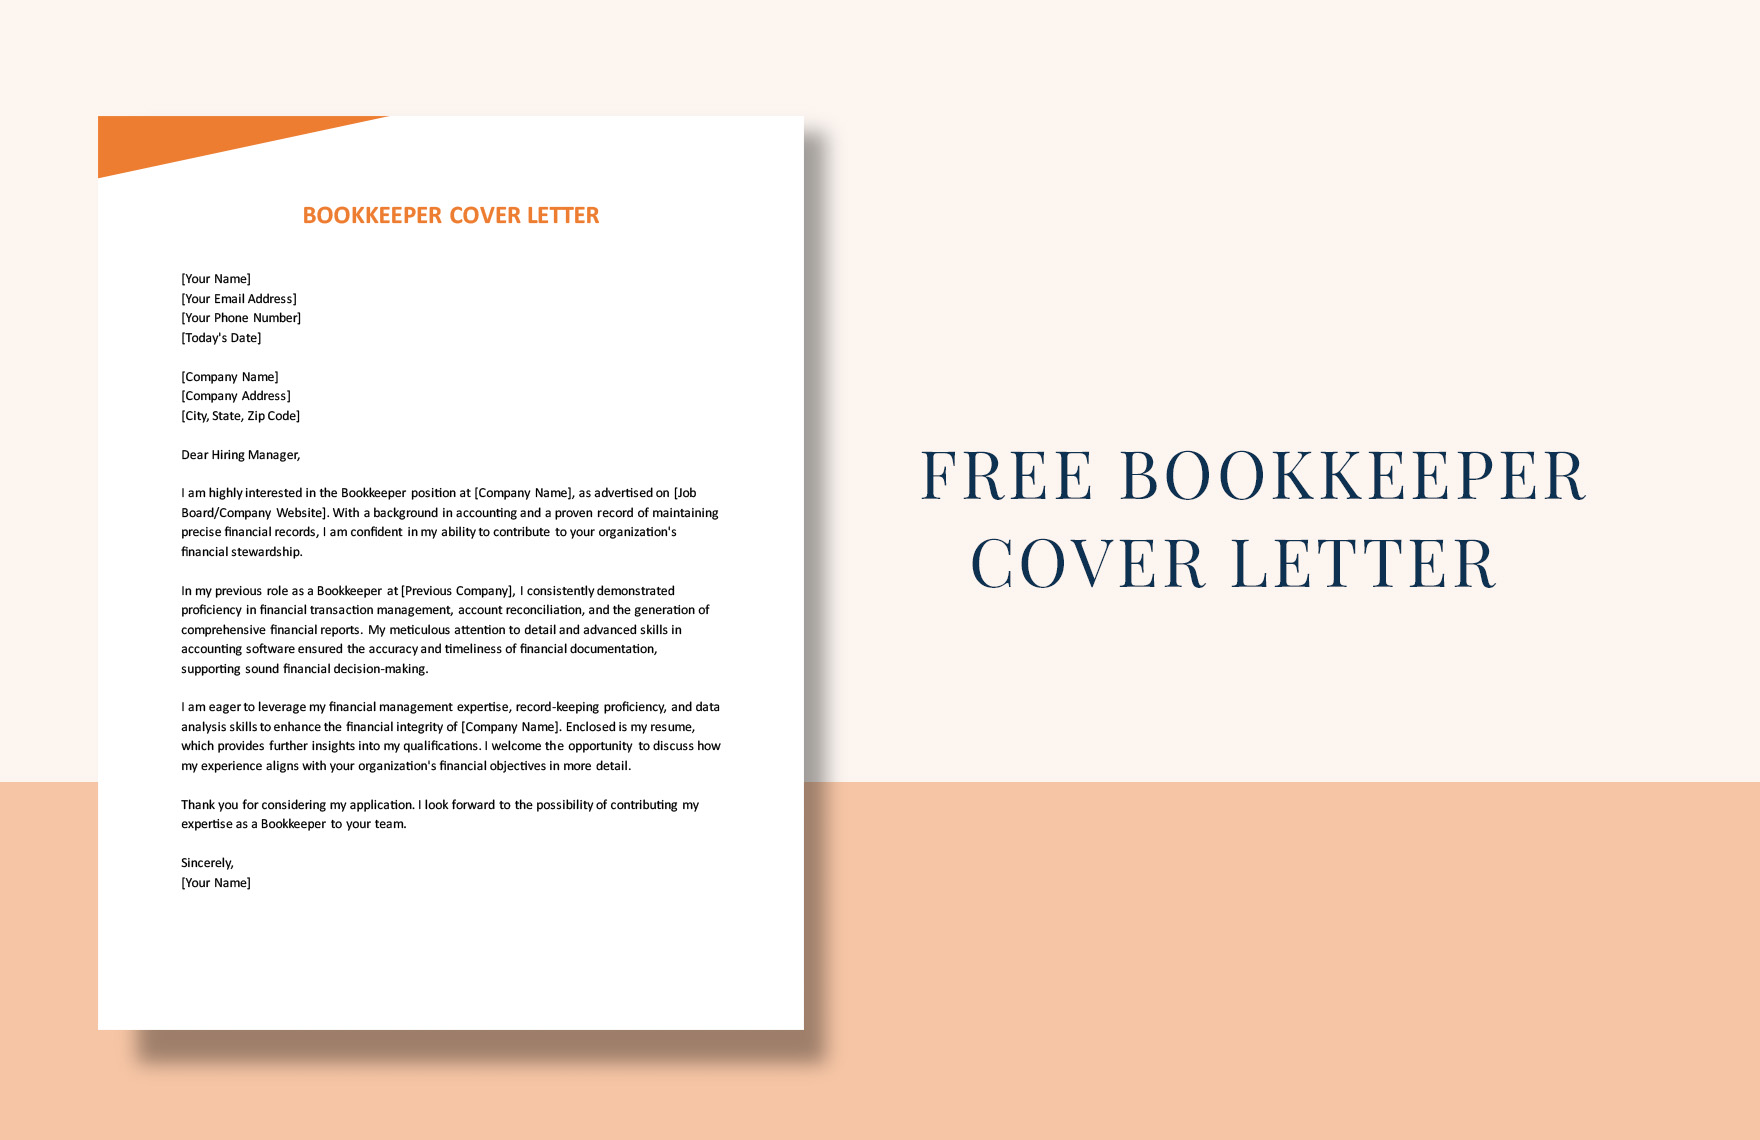 Bookkeeper Cover Letter